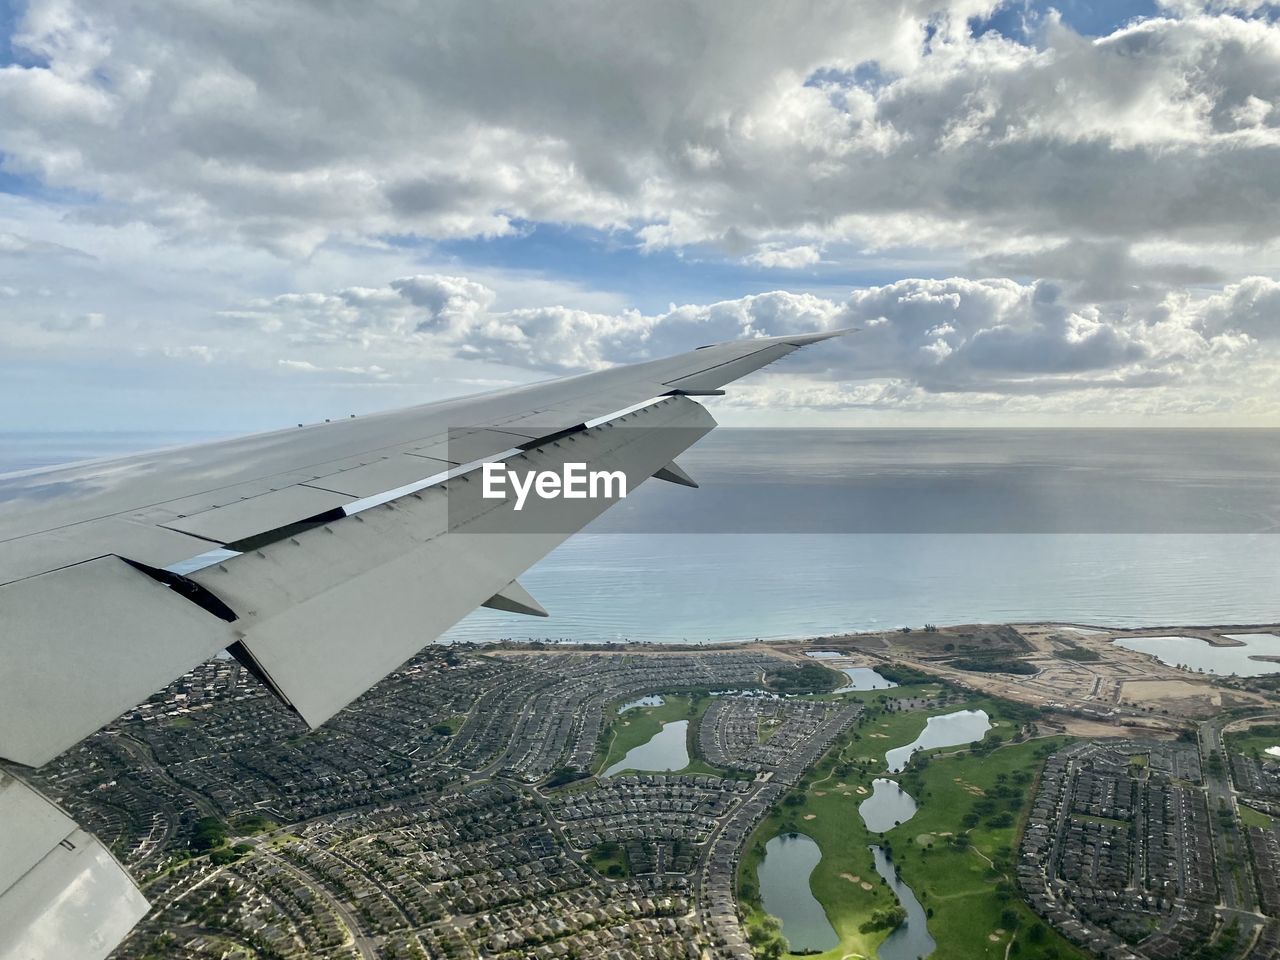 AERIAL VIEW OF SEA AND AIRPLANE FLYING IN SKY